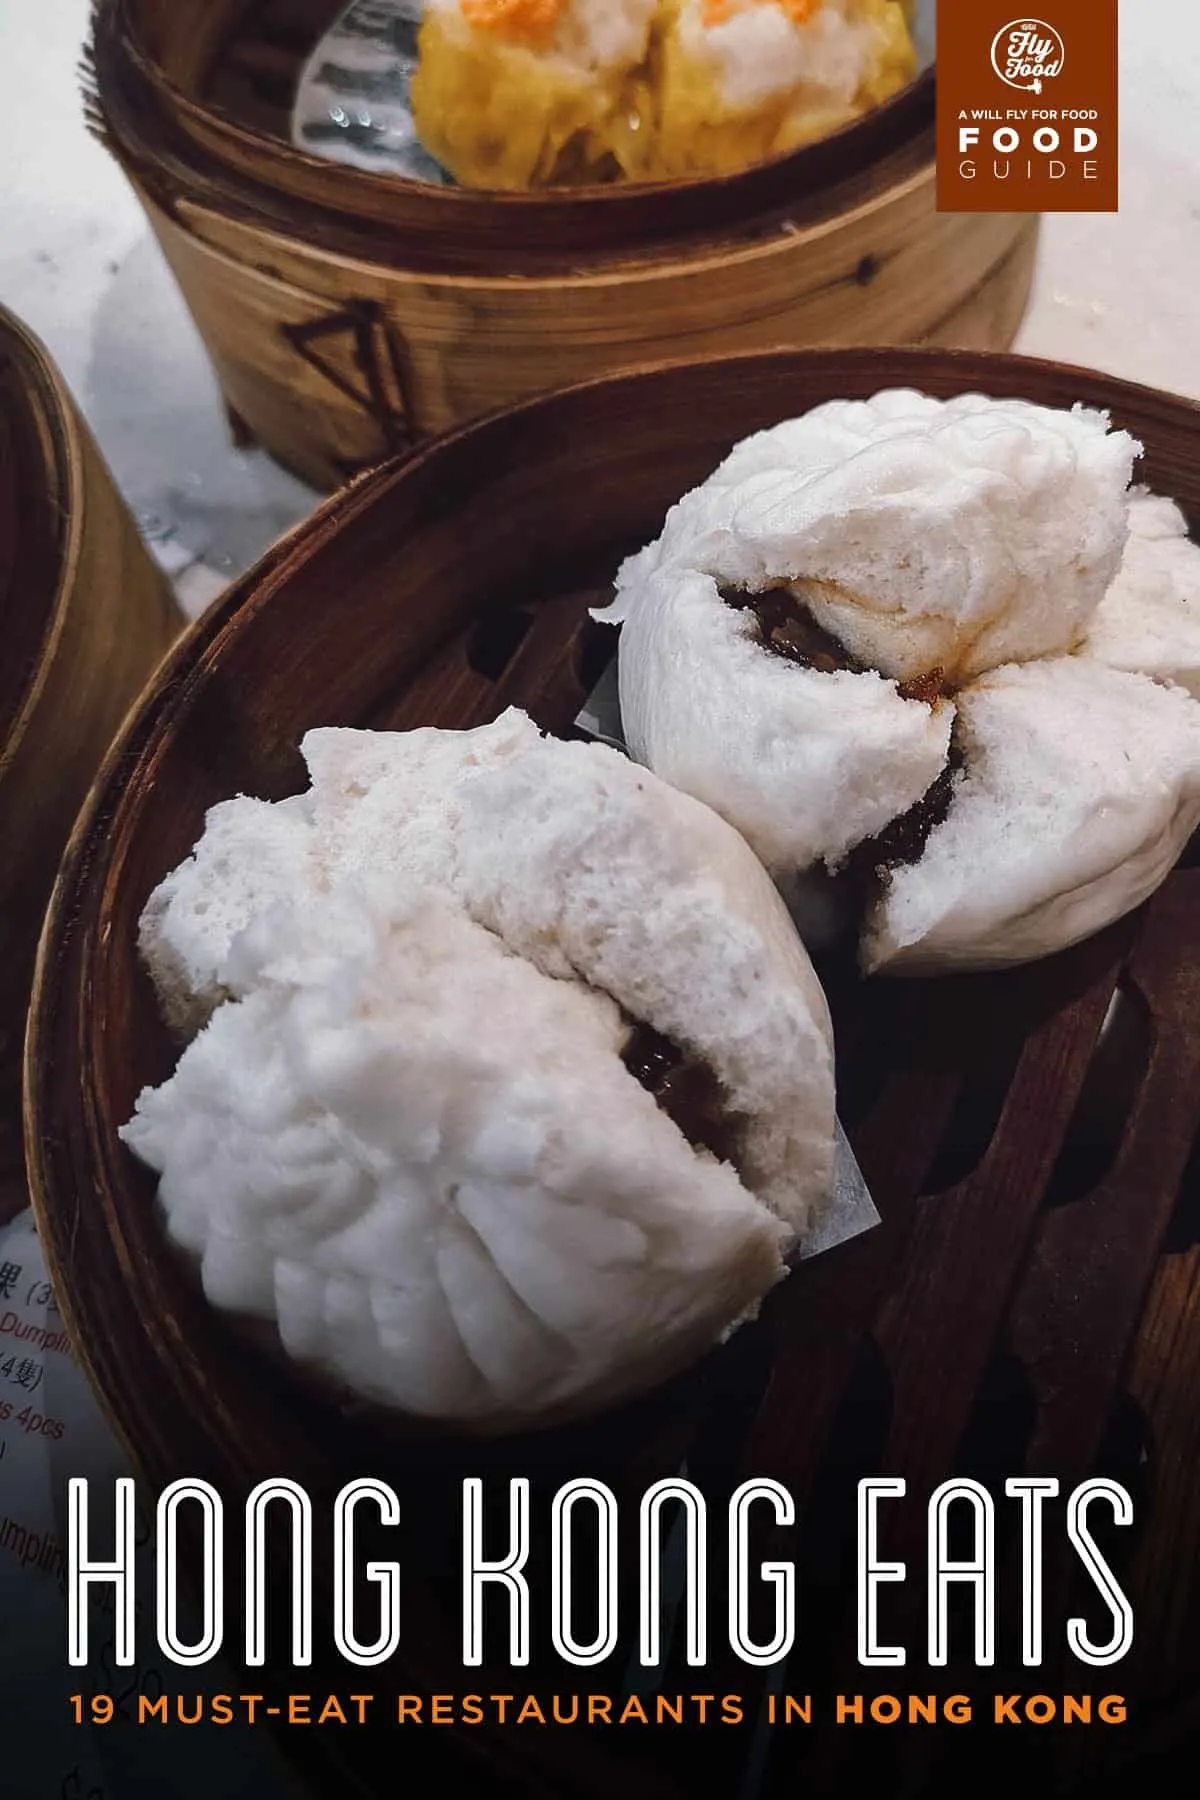 Barbecued pork buns at One Dim Sum in Hong Kong